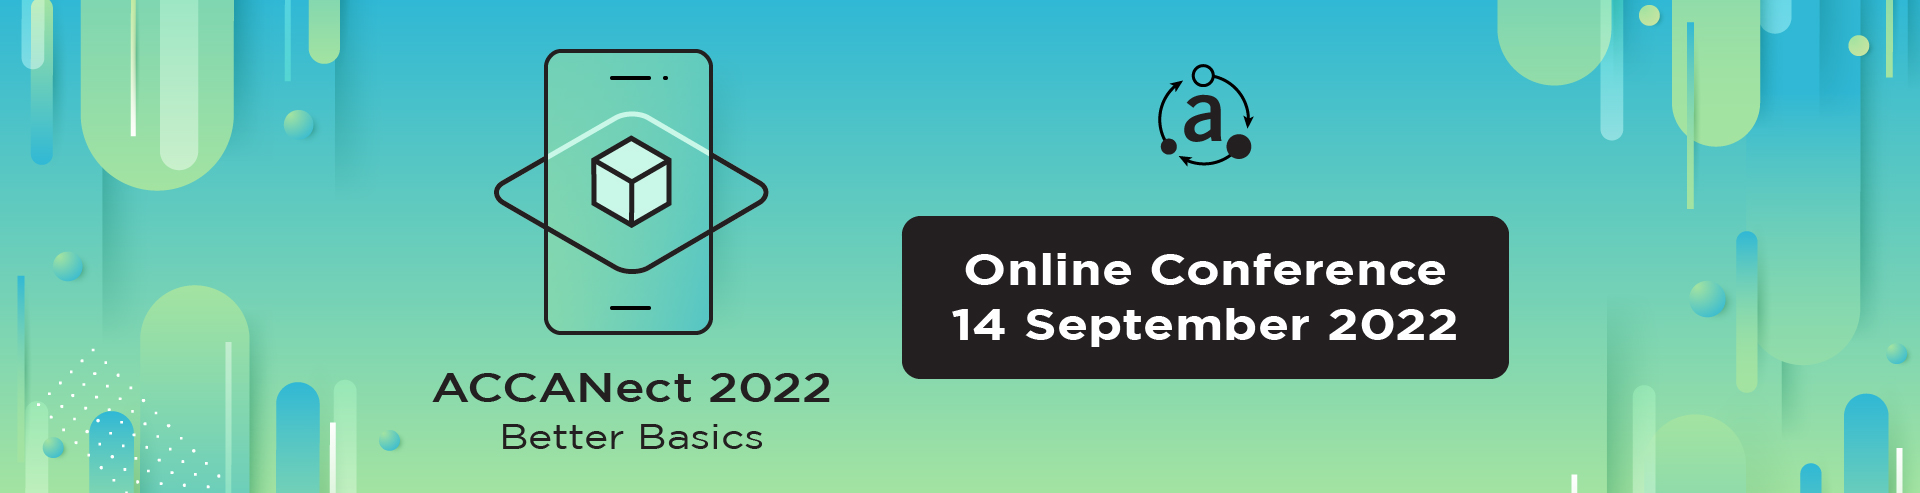 ACCANect2022 Webpage Banner